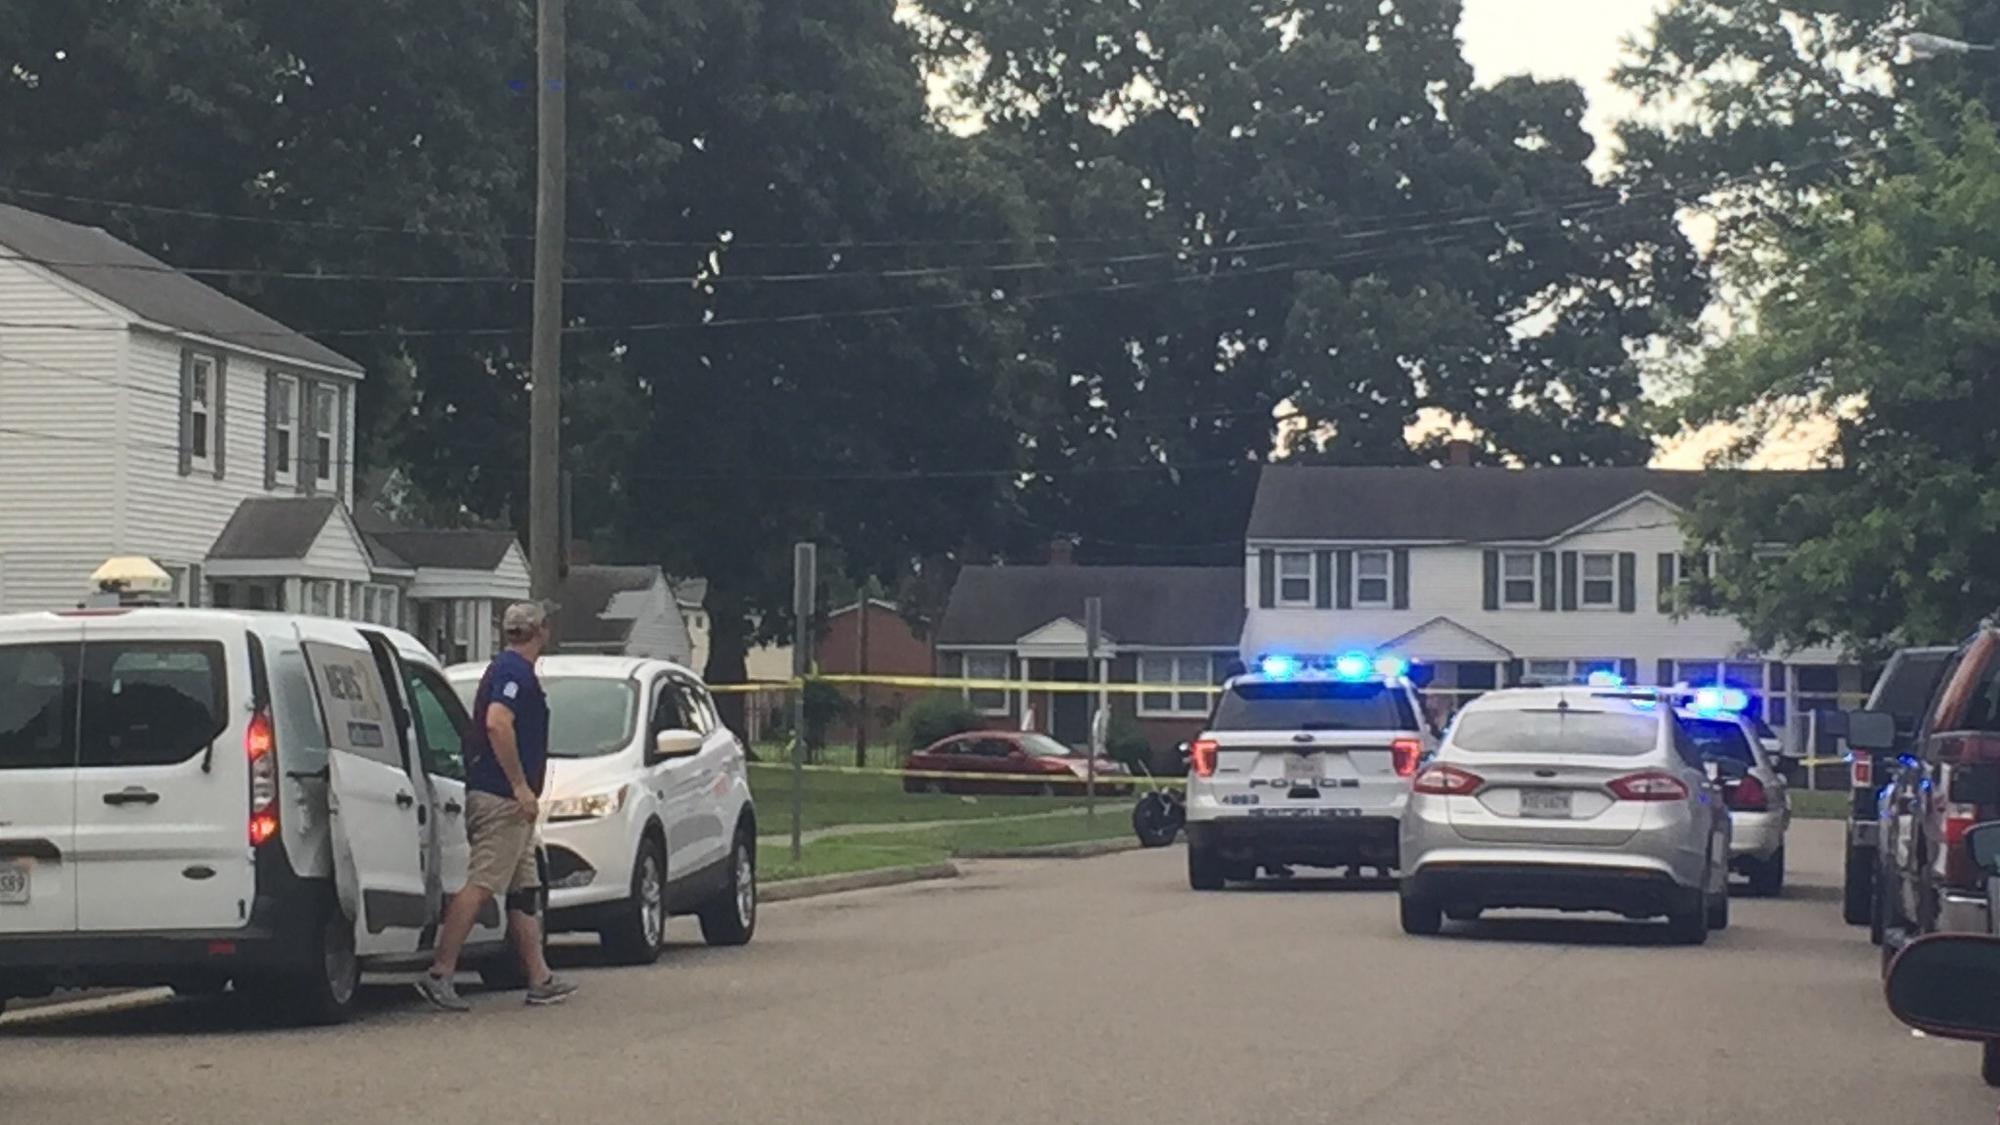 Police Newport News Man Dies After Being Shot In June The